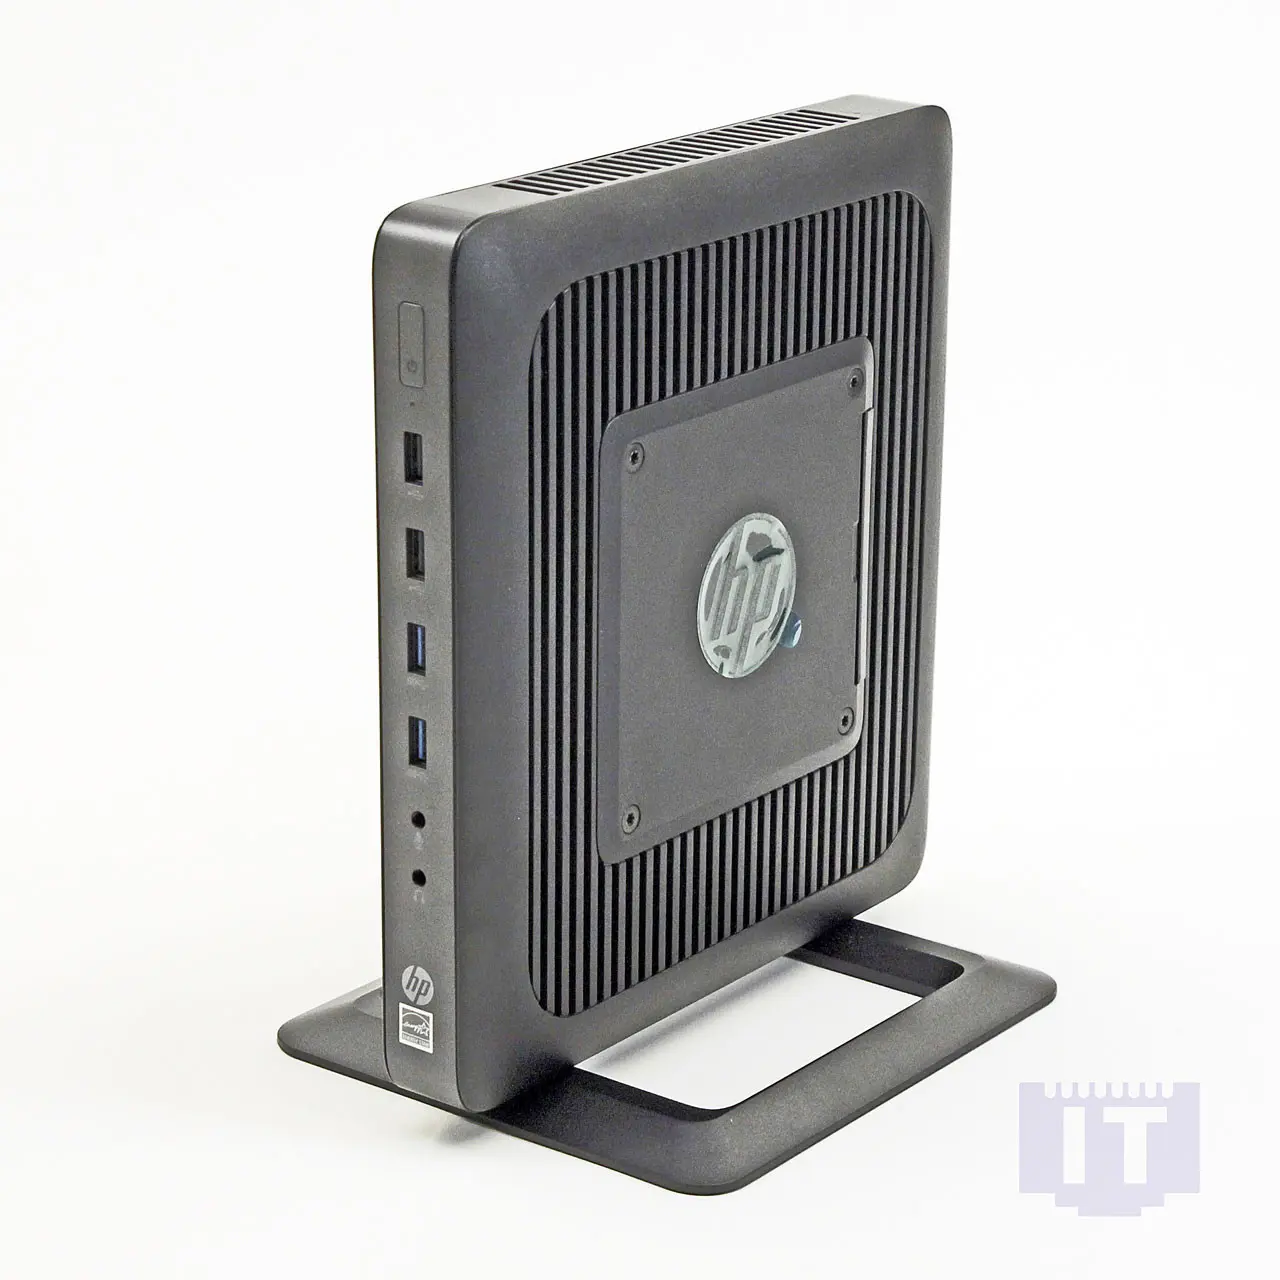 hewlett packard thin client t620 - What is the difference between t620 and t620 plus